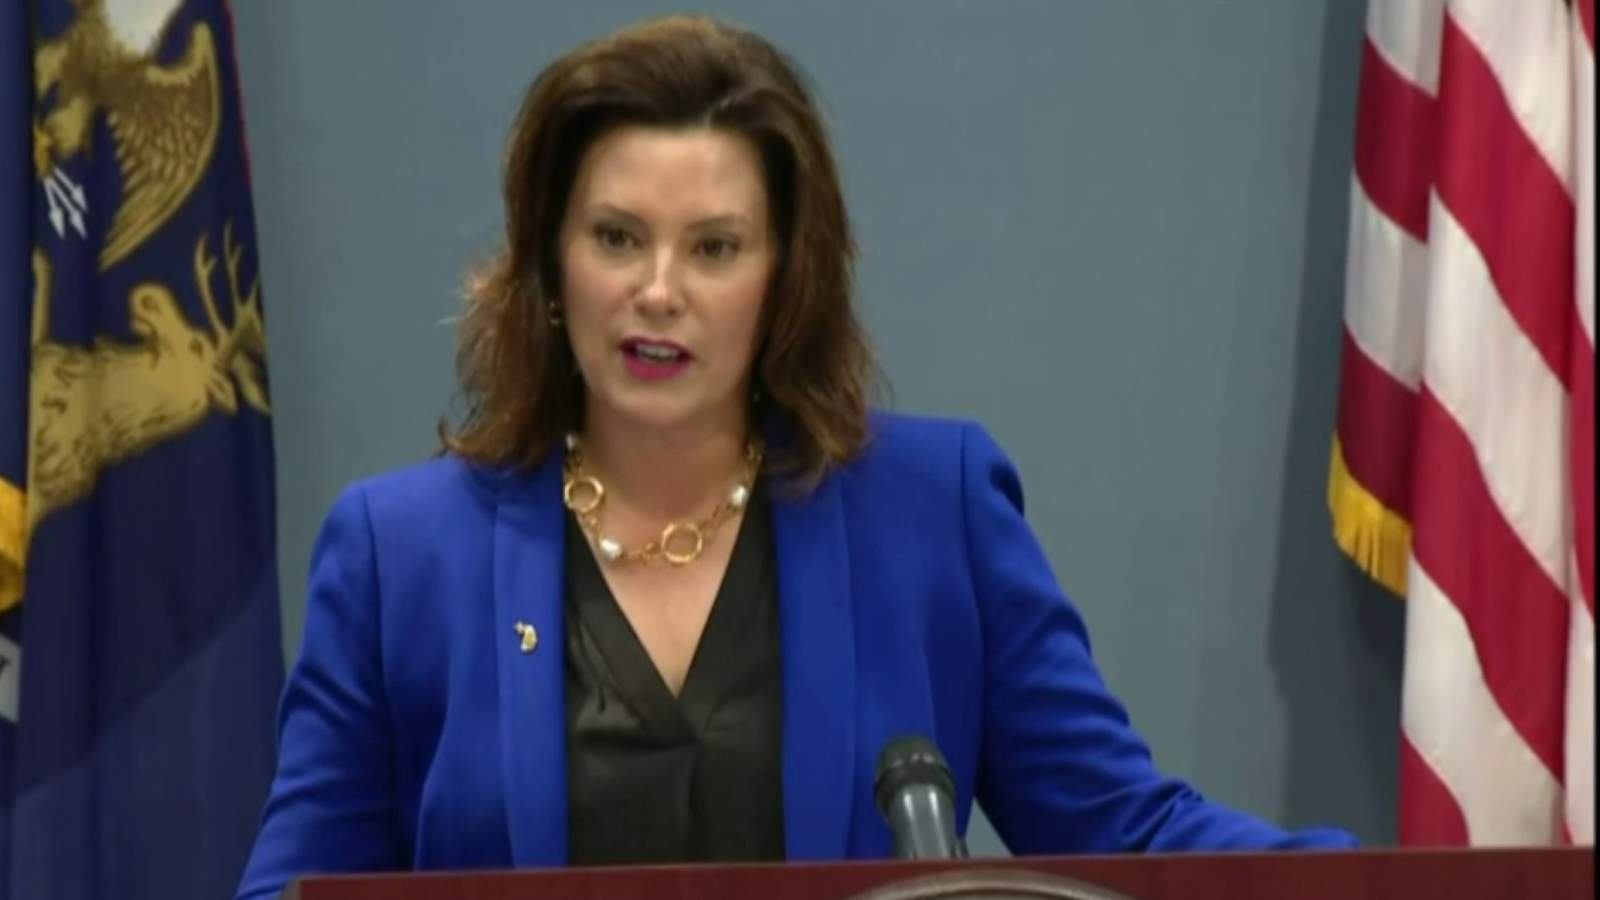 Poll results: Was plot to kidnap Michigan Gov. Whitmer a serious threat, or just talk?